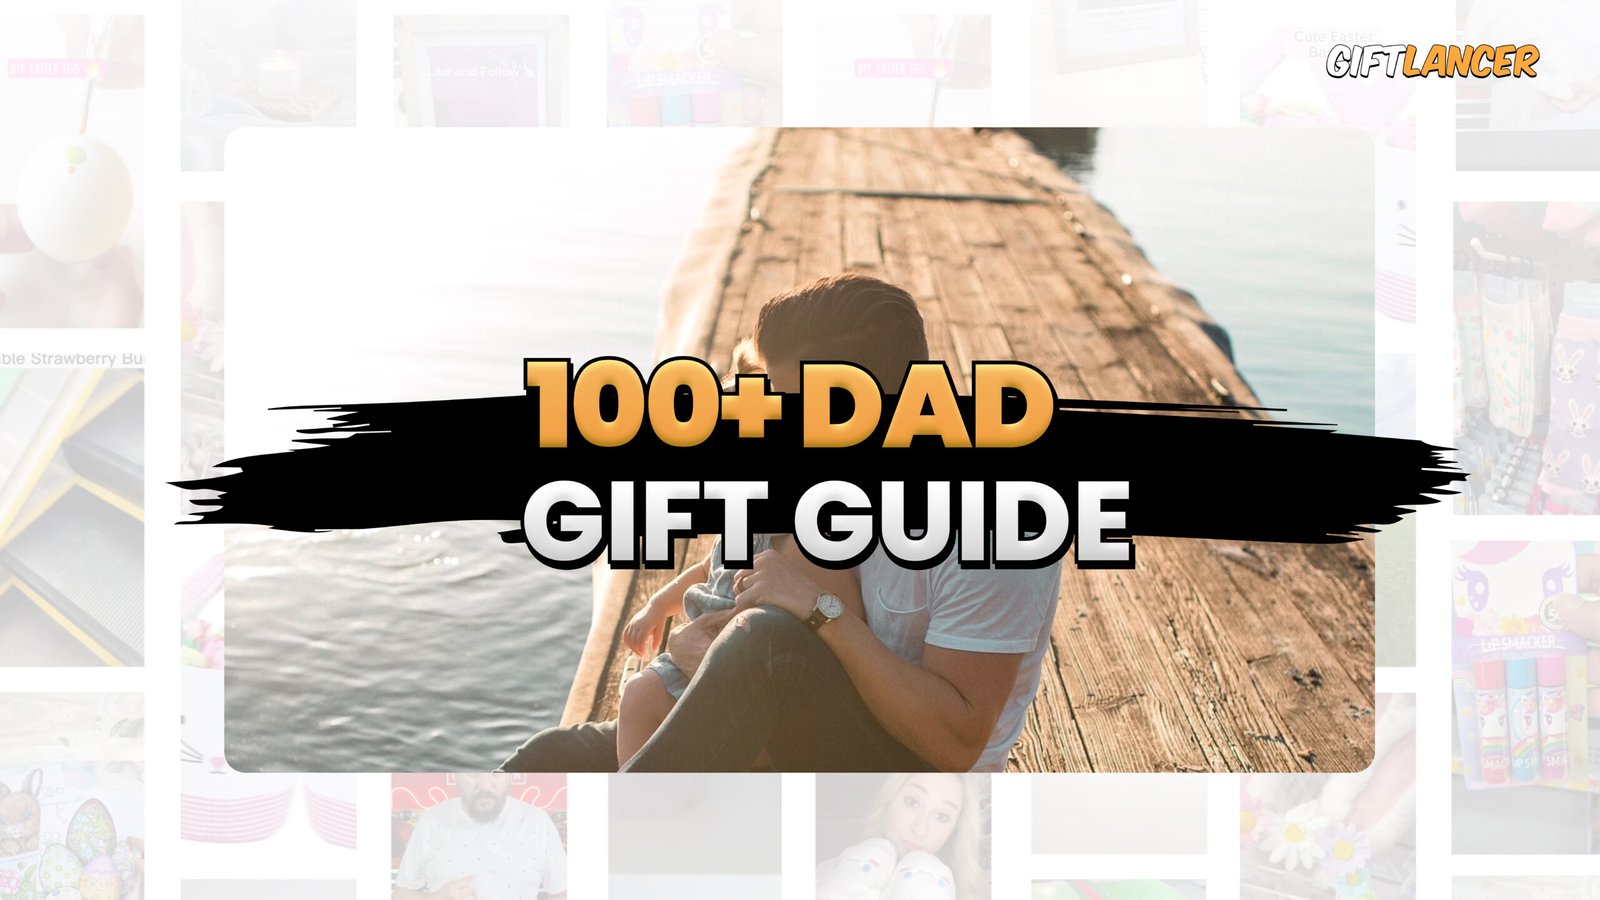 Top 100+ Gift Idea for dad